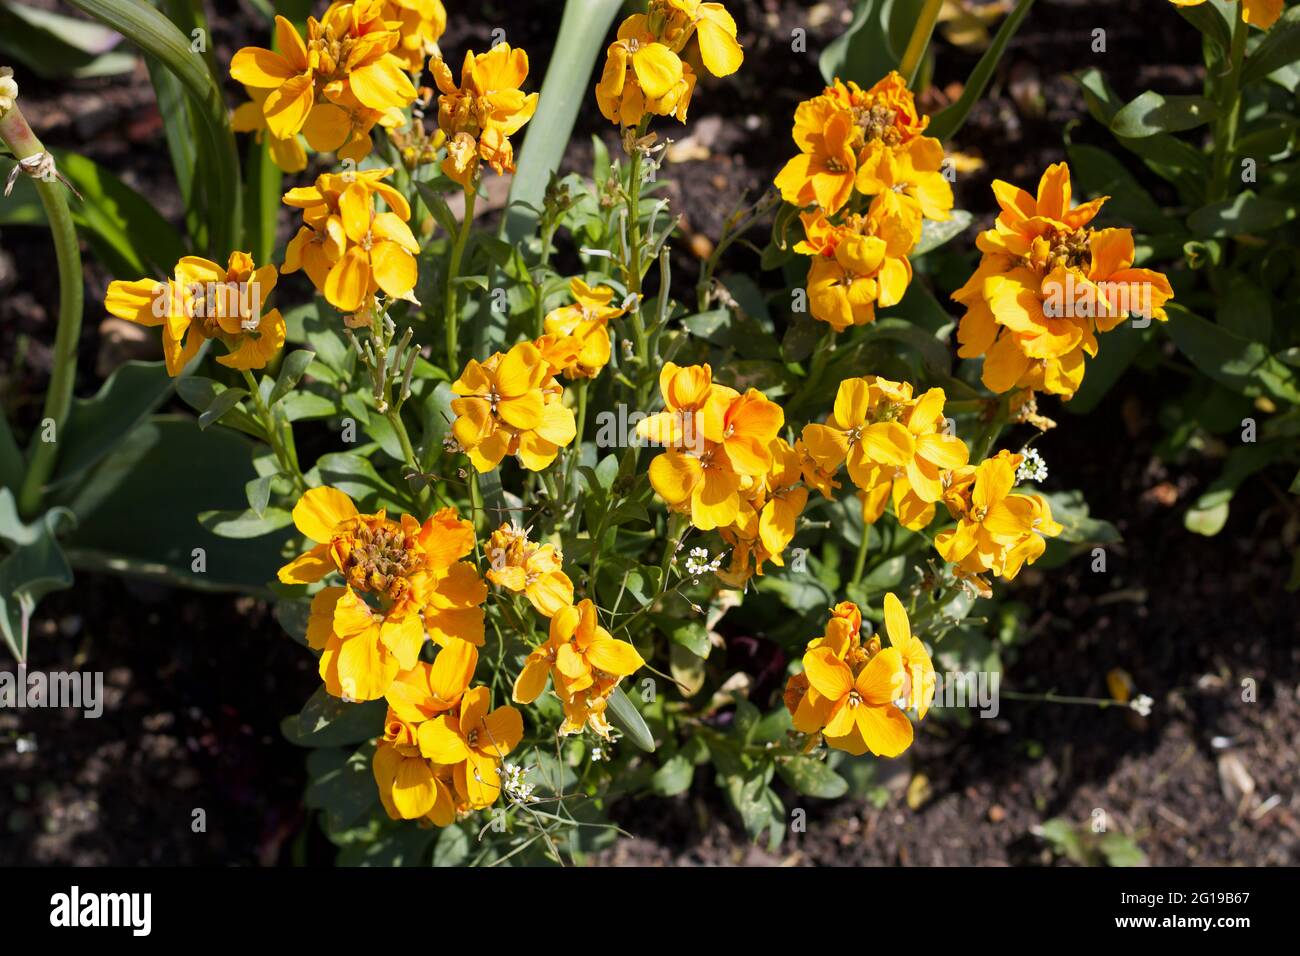 Beautiful sunlit erysimum flowers and foliage in garden in spring Stock Photo